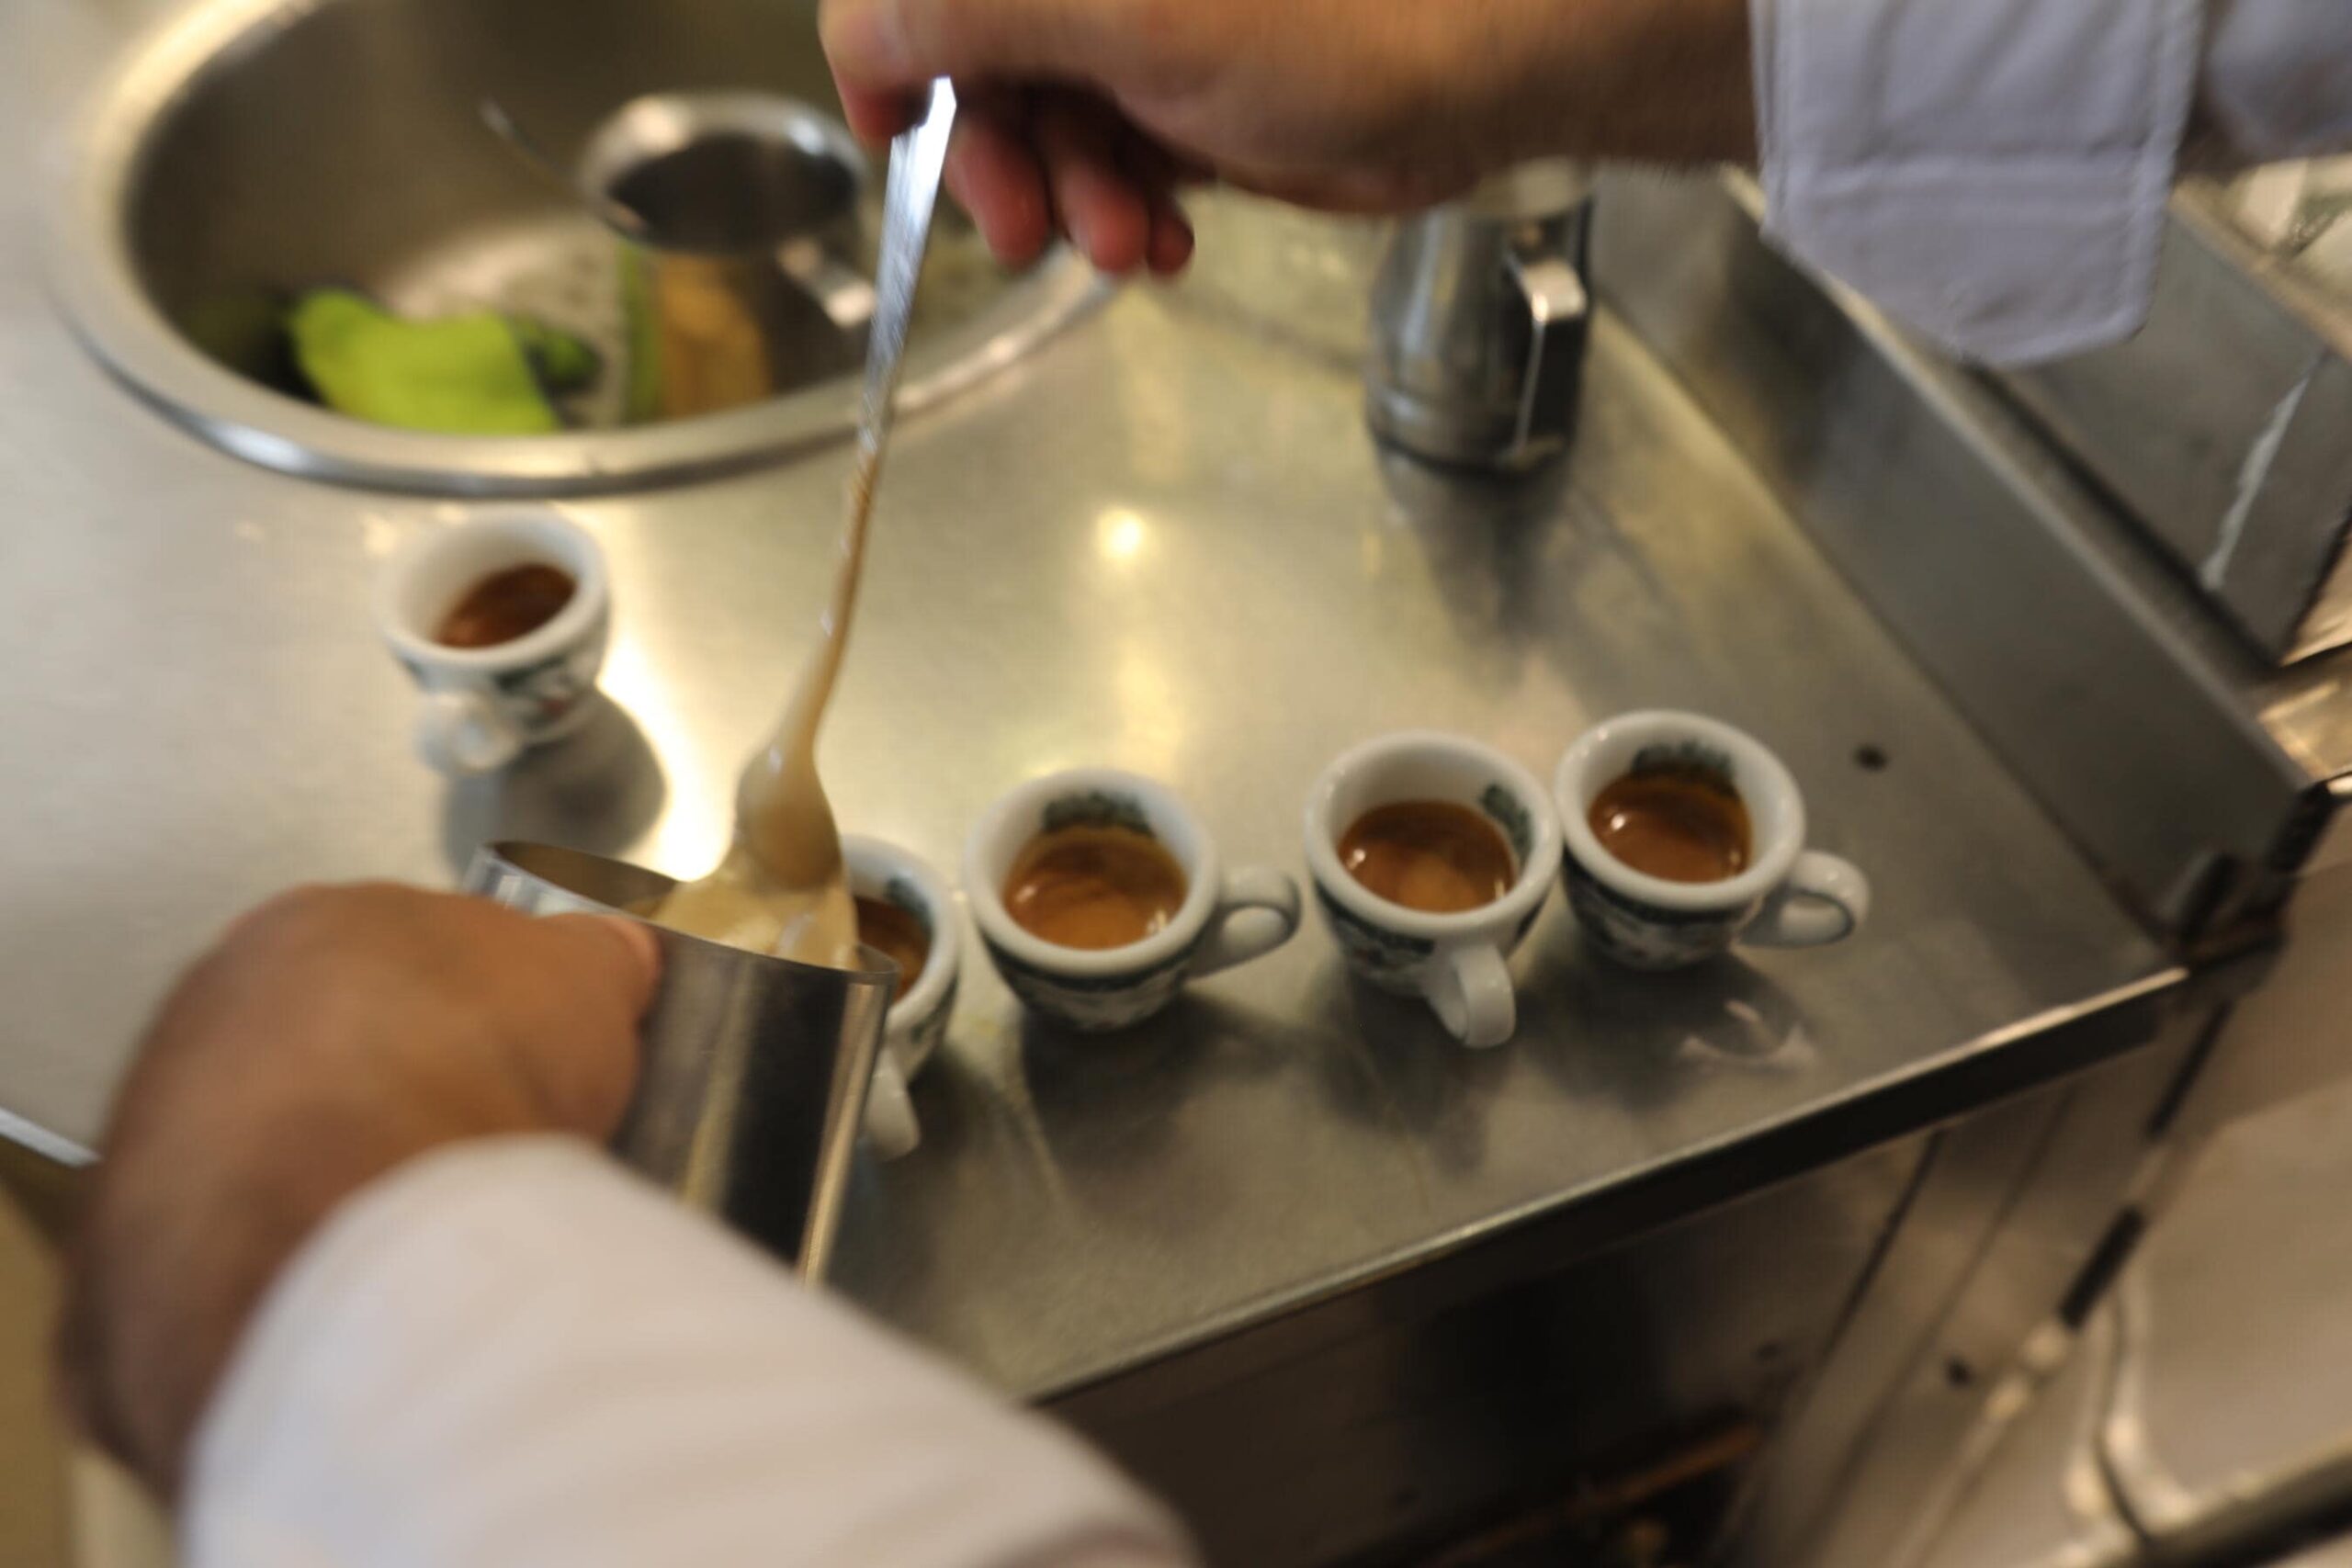 In Naples, Italy You'll Find Caffè Sospeso, the Suspended Coffee